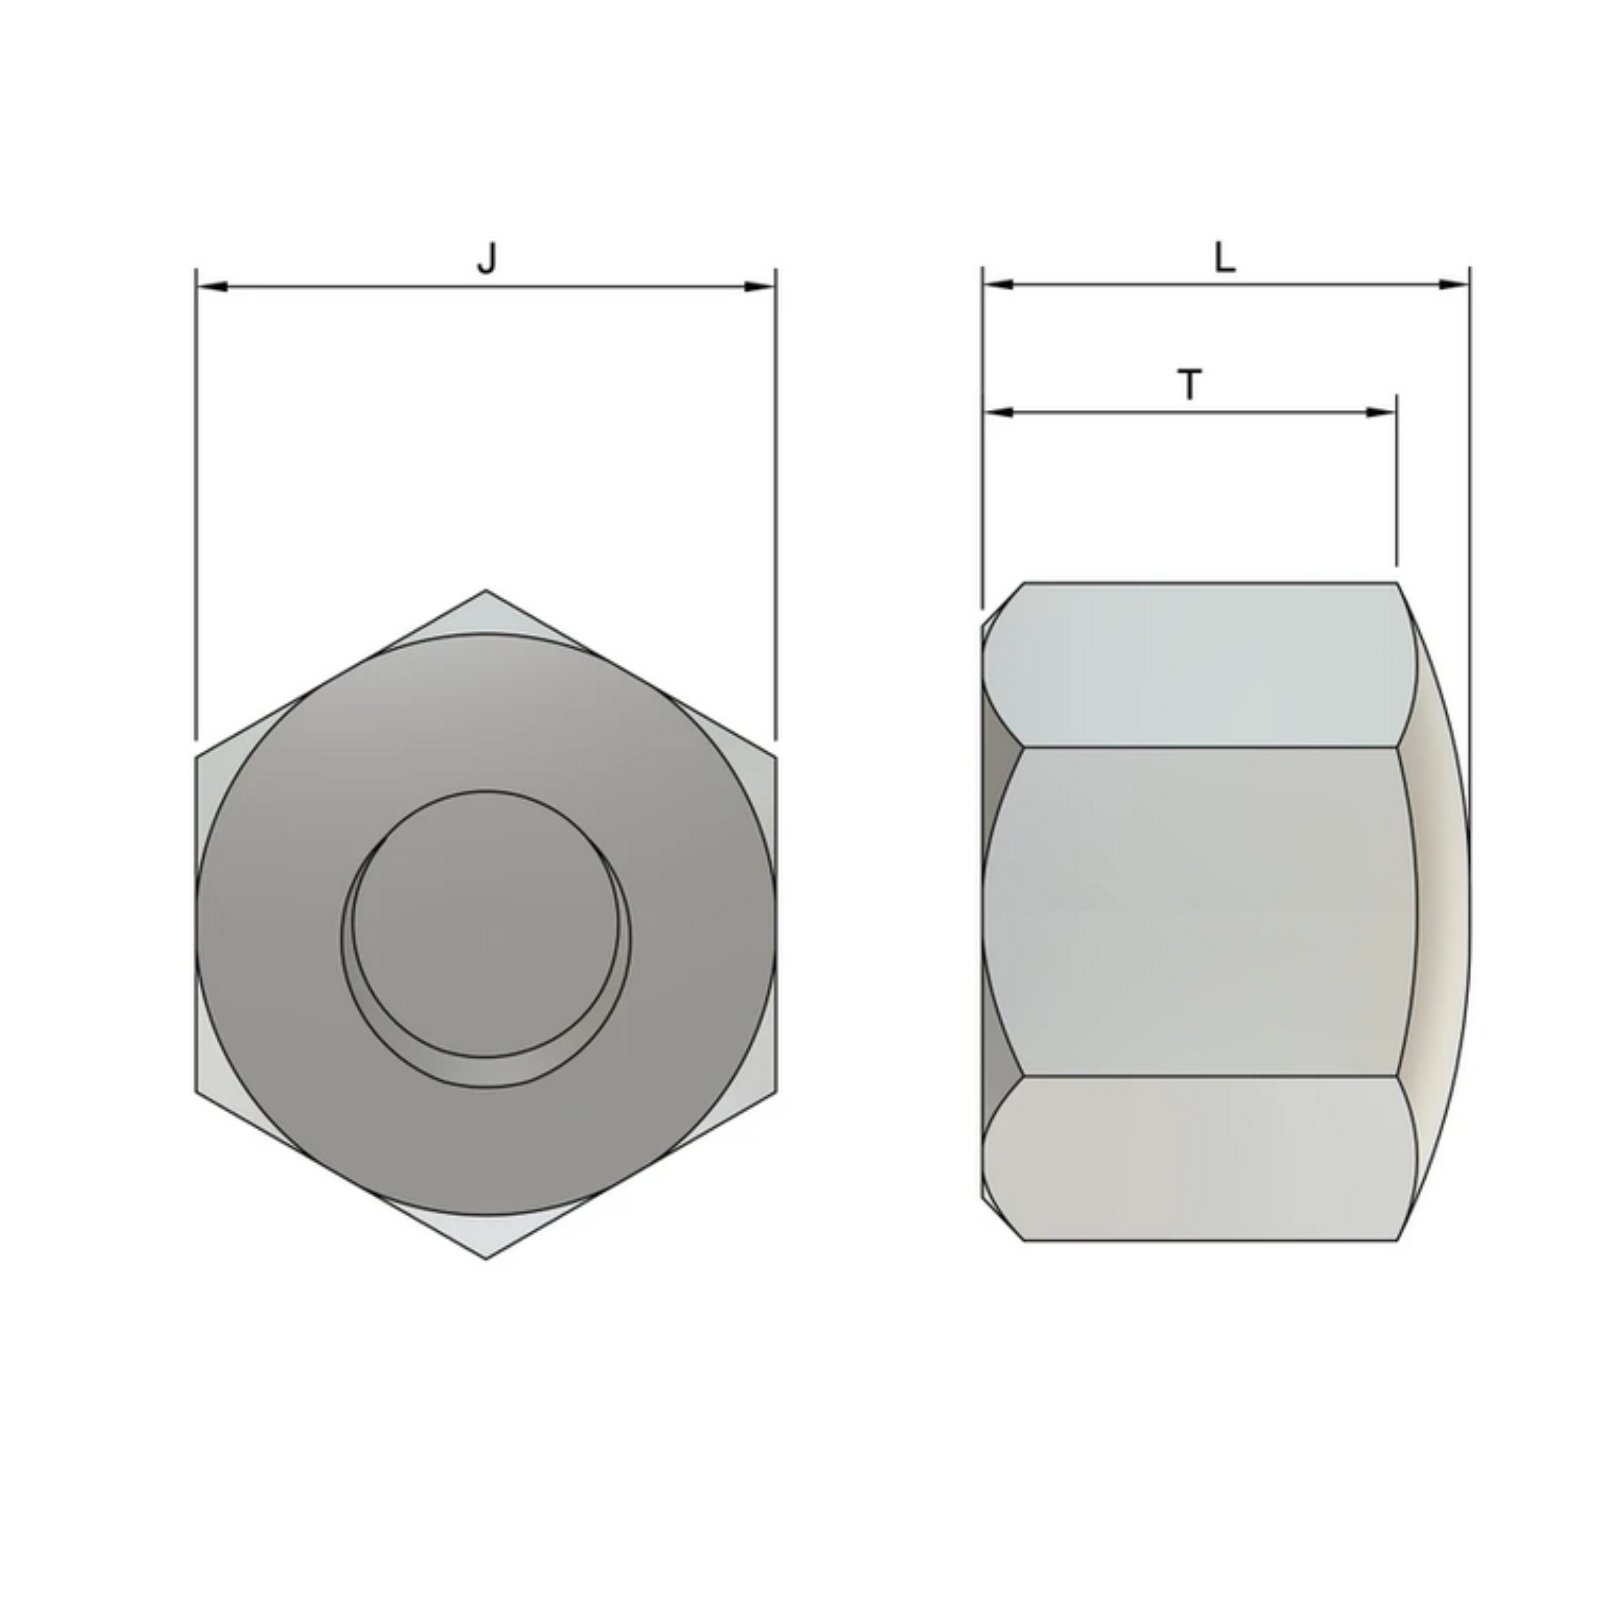 M4 Cap Nuts (DIN 917) - Stainless Steel (A4)